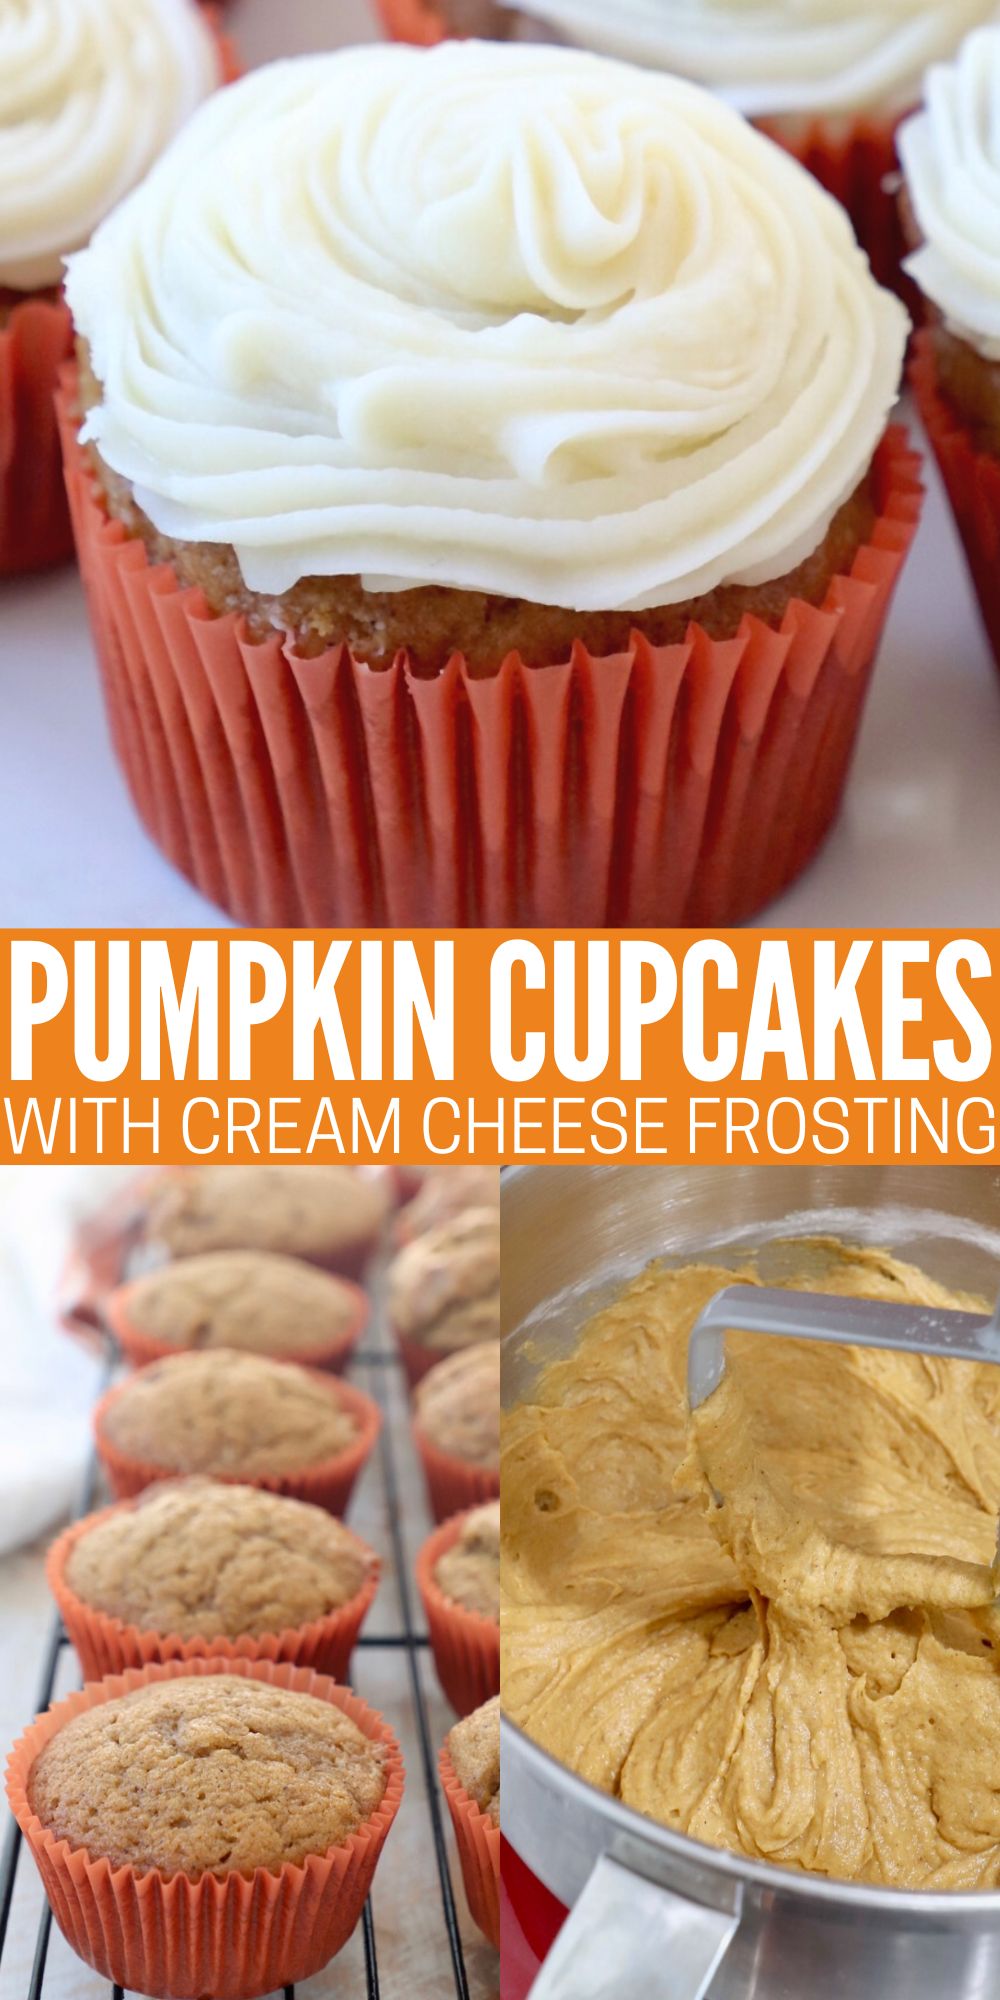 Pumpkin Cupcakes with Cream Cheese Frosting - WhitneyBond.com